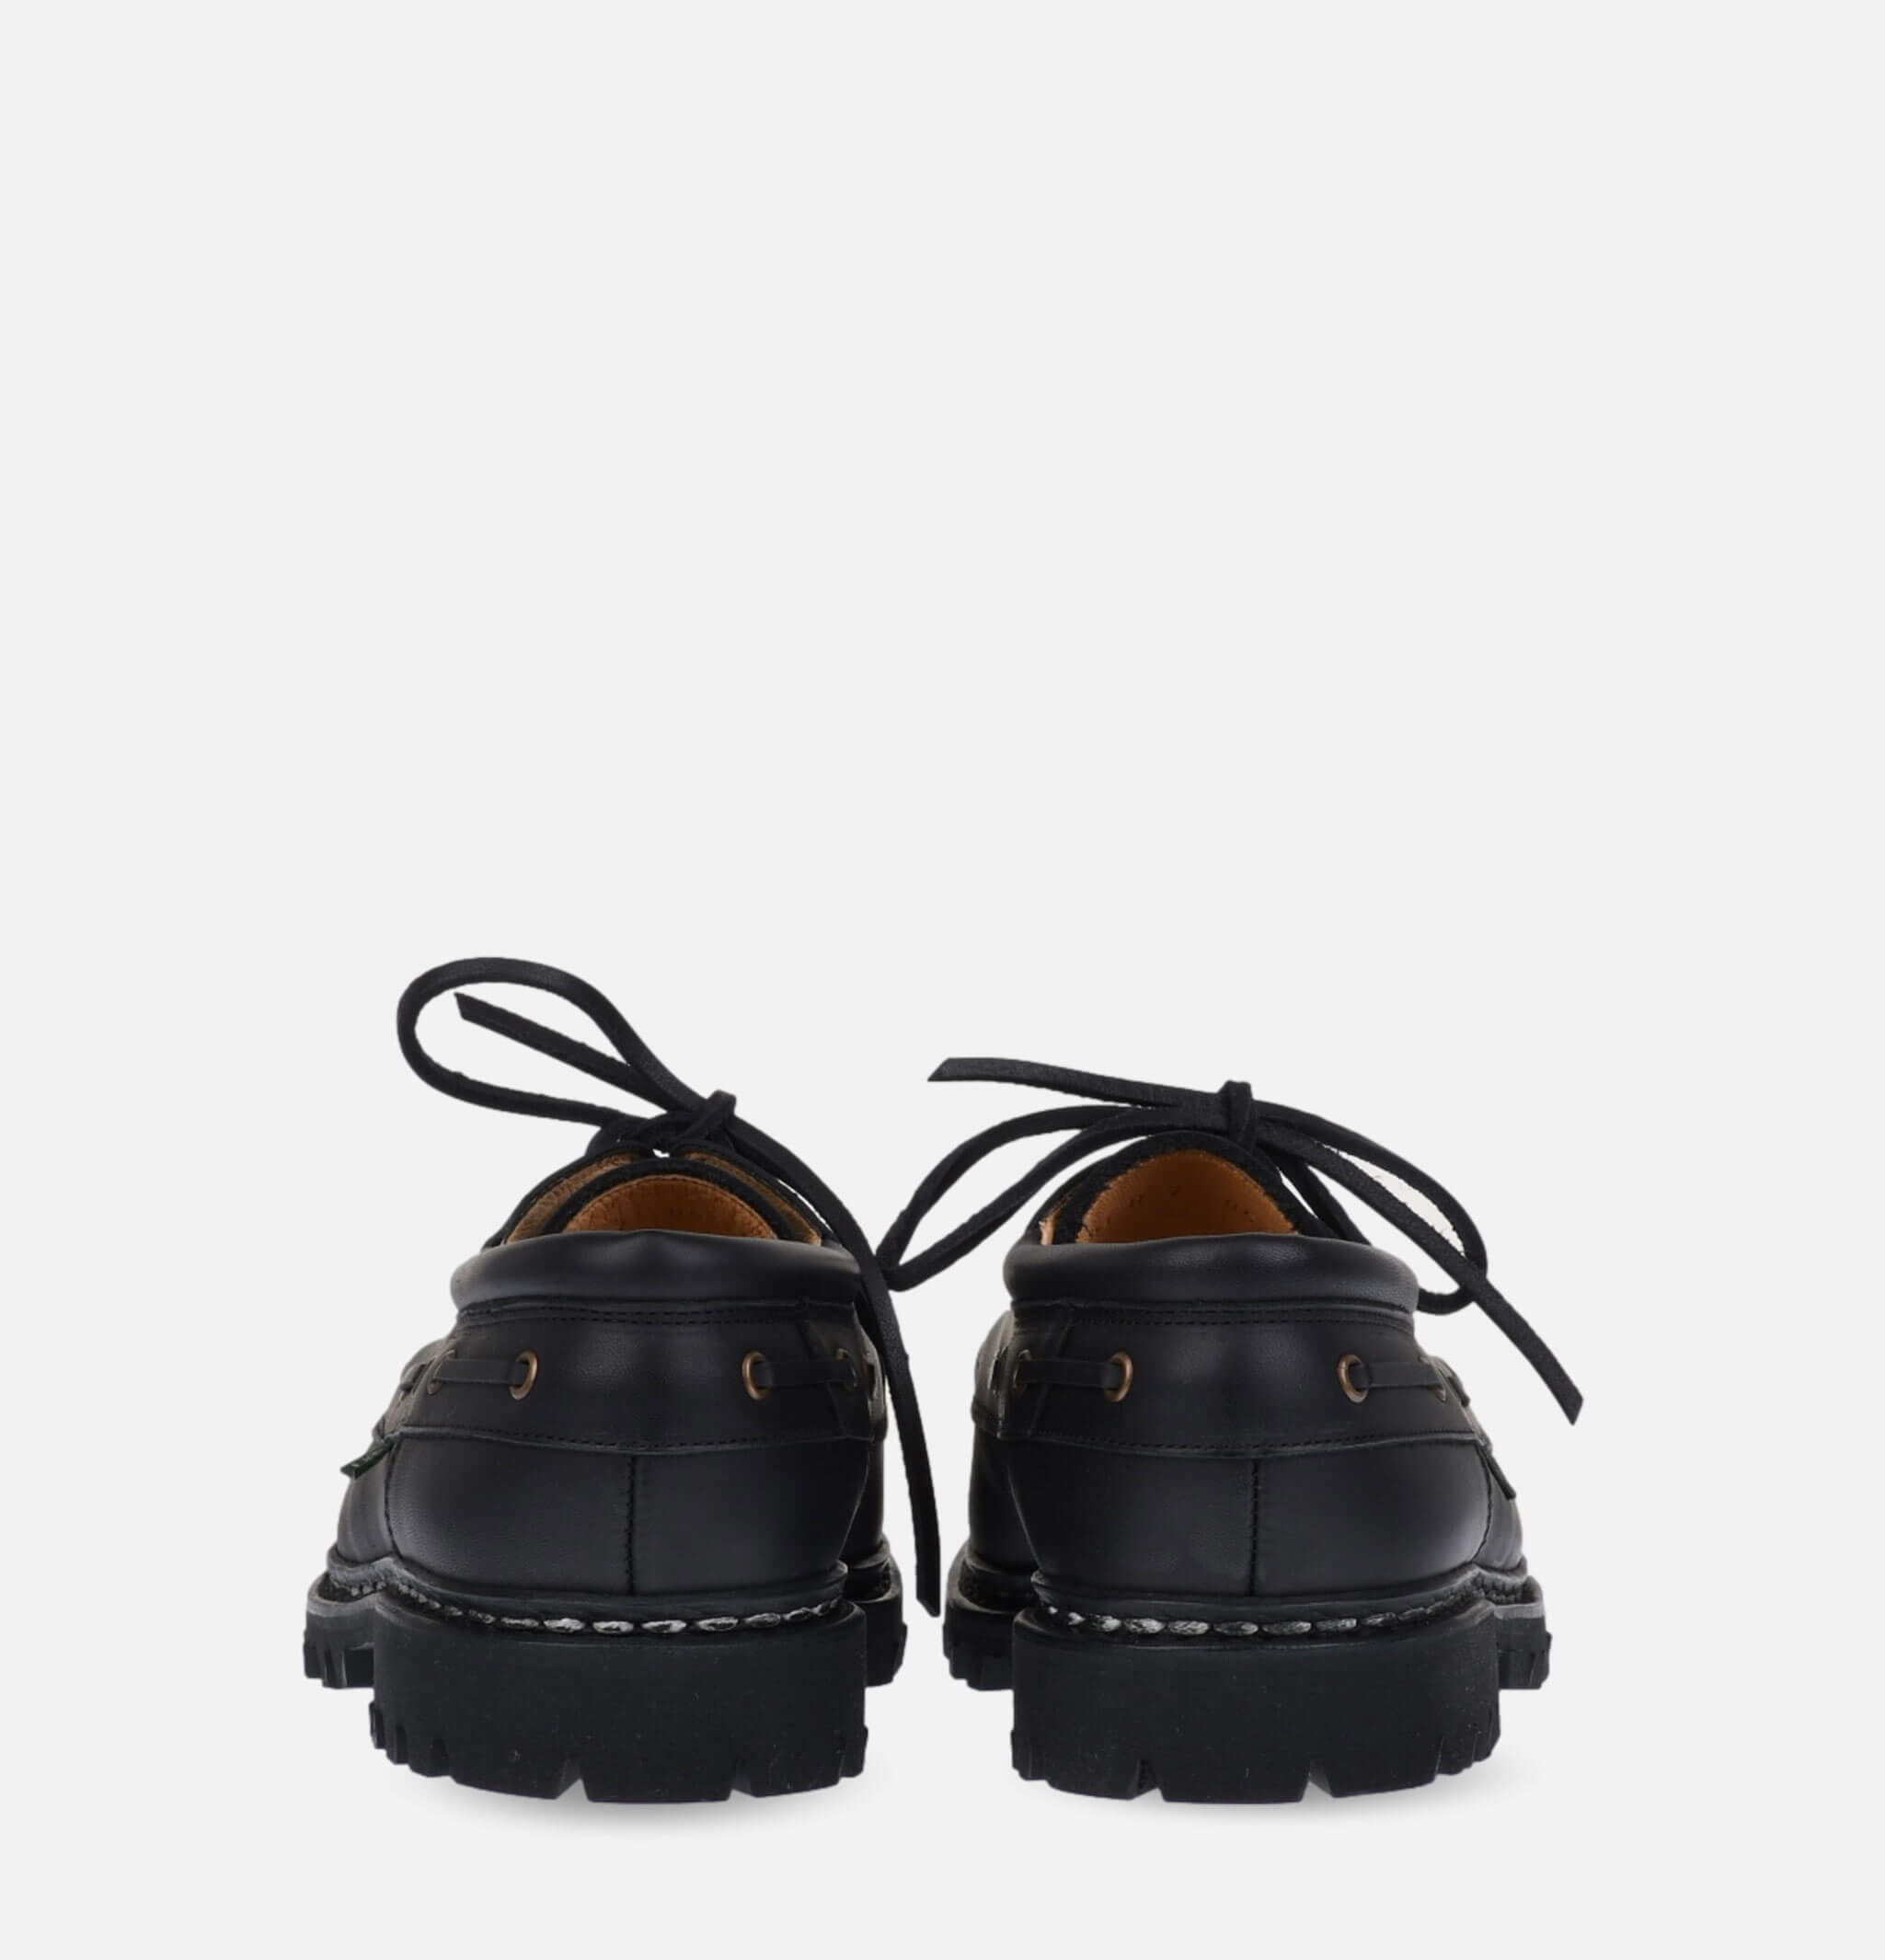 Paraboot Shoes Chimey Black